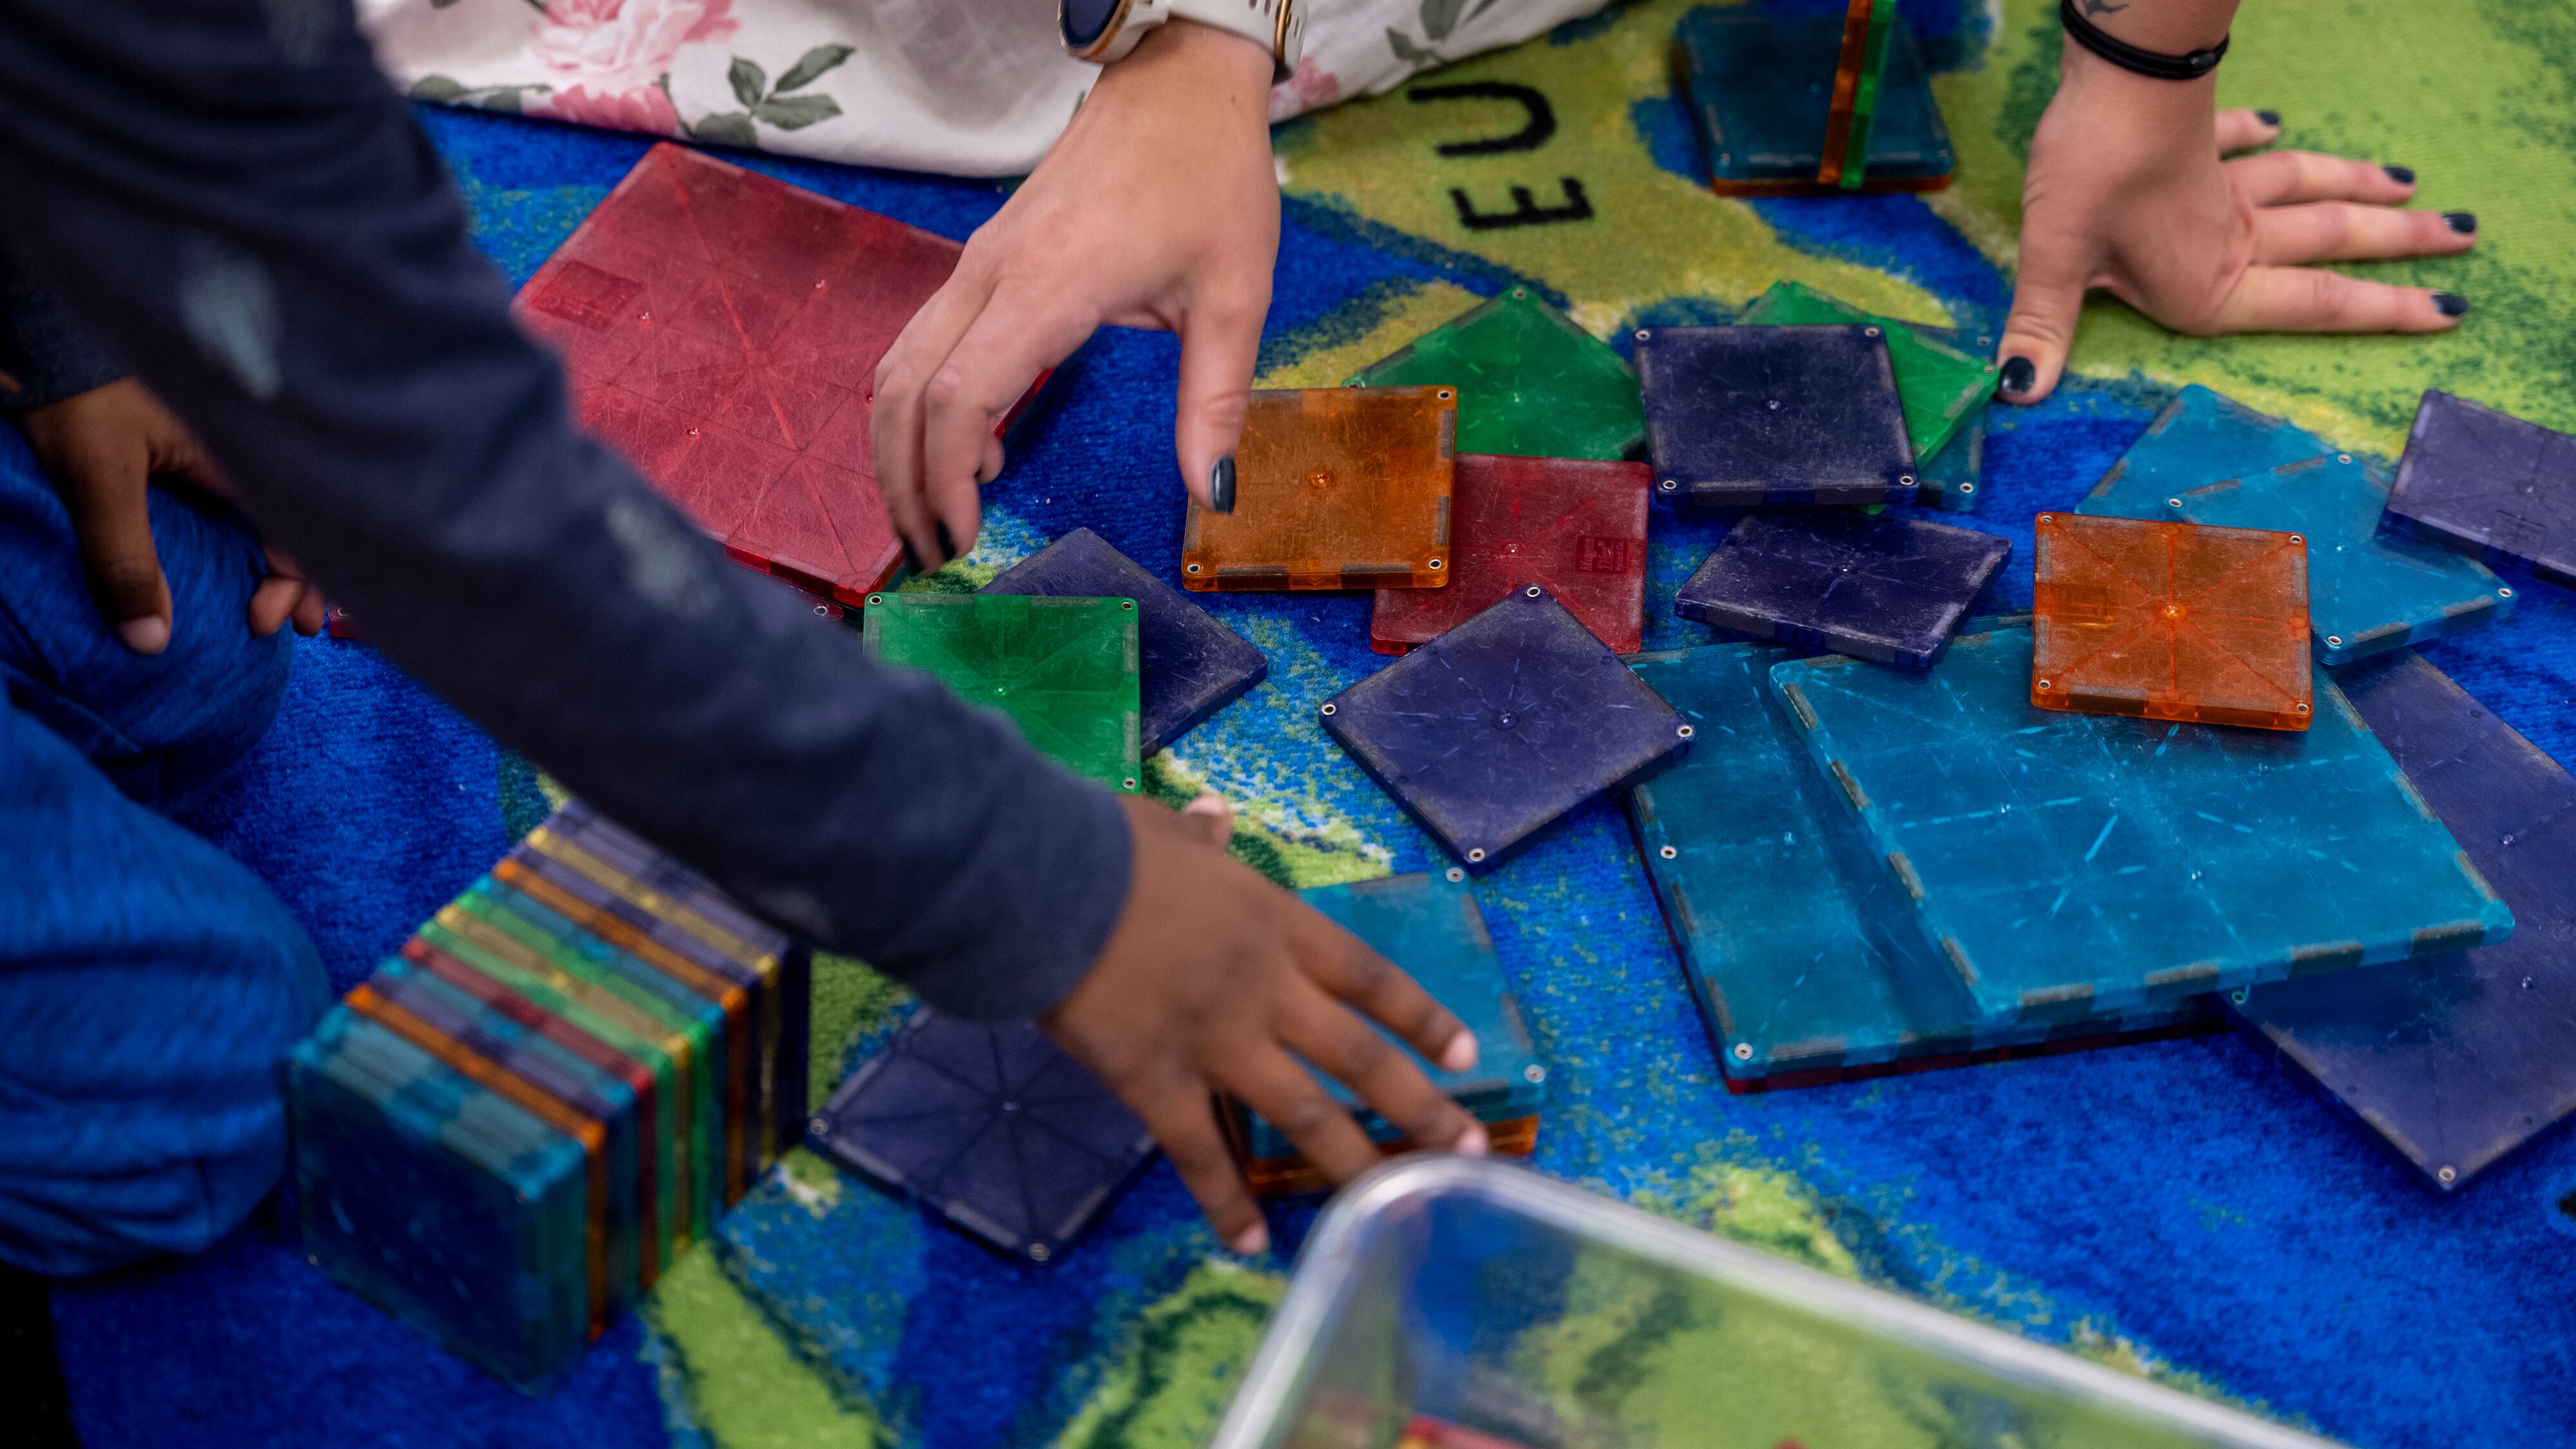 Two sets of hands, one belonging to a teacher and one belonging to a child, play with colorful tiles